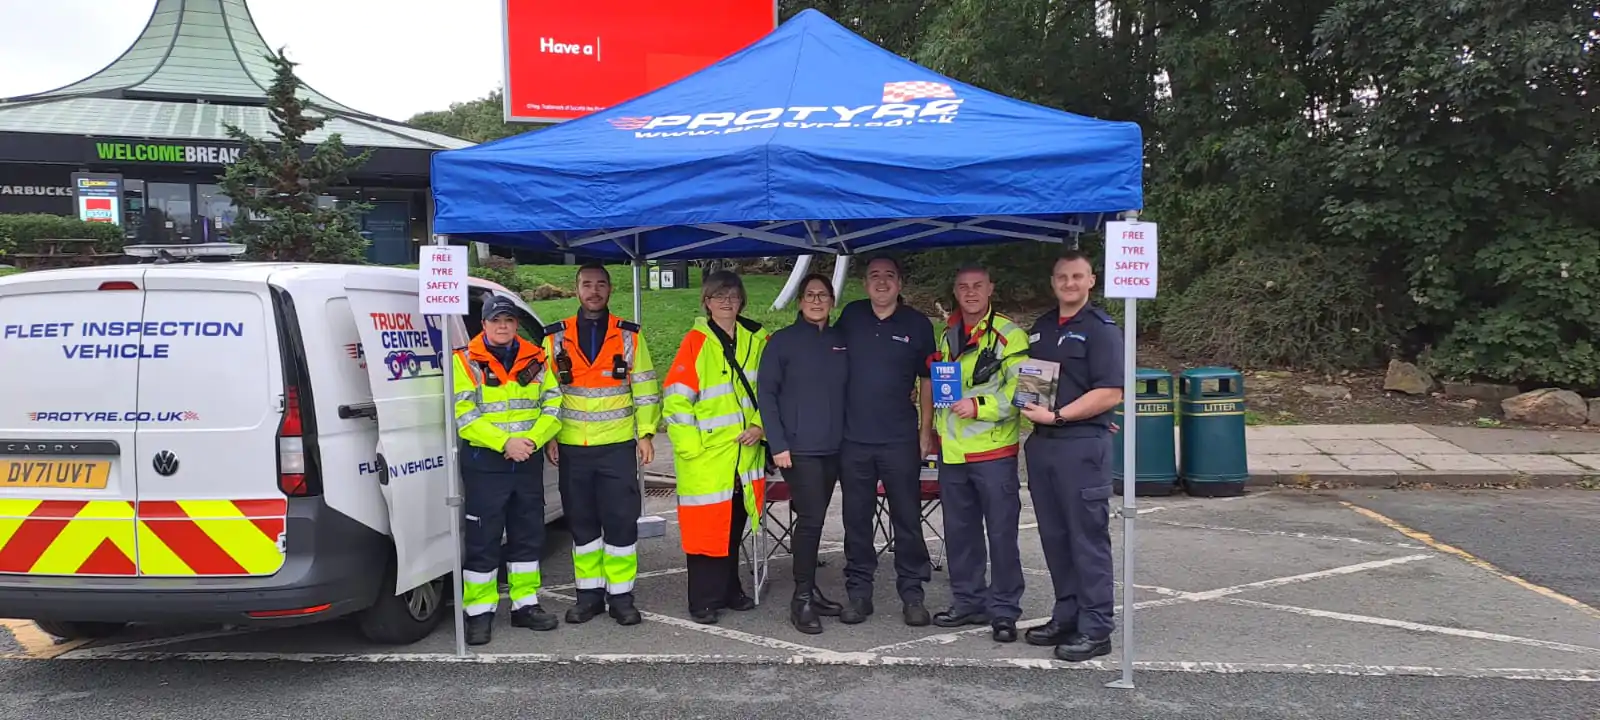 TyreSafe, Protyre support Operation Pennine’s road safety mission